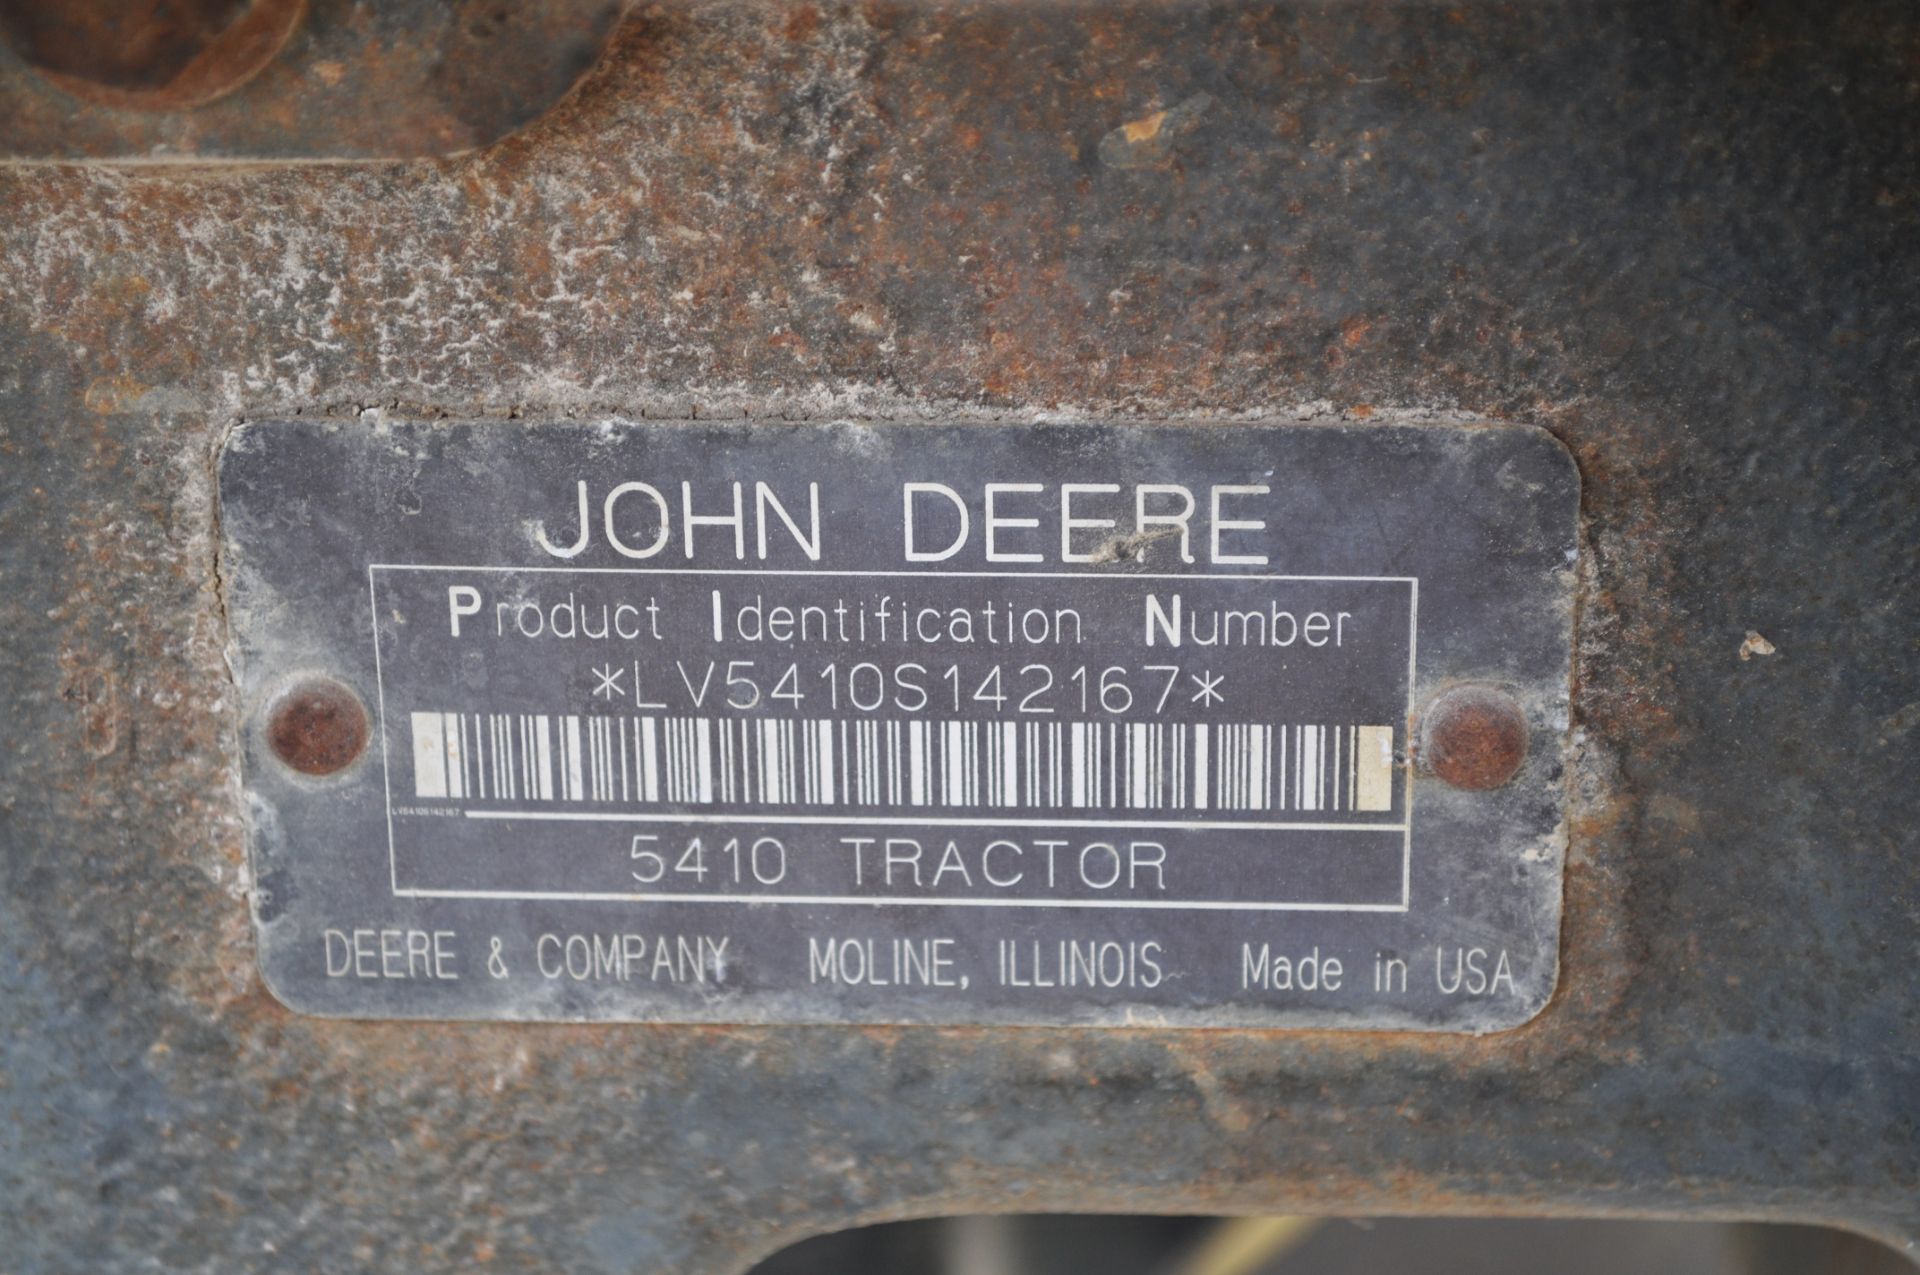 John Deere 5410 tractor, 2WD, w/ 520 loader, 16.9-30 rear tires, 11 L 15.5 front tires, 4090 hrs - Image 15 of 15